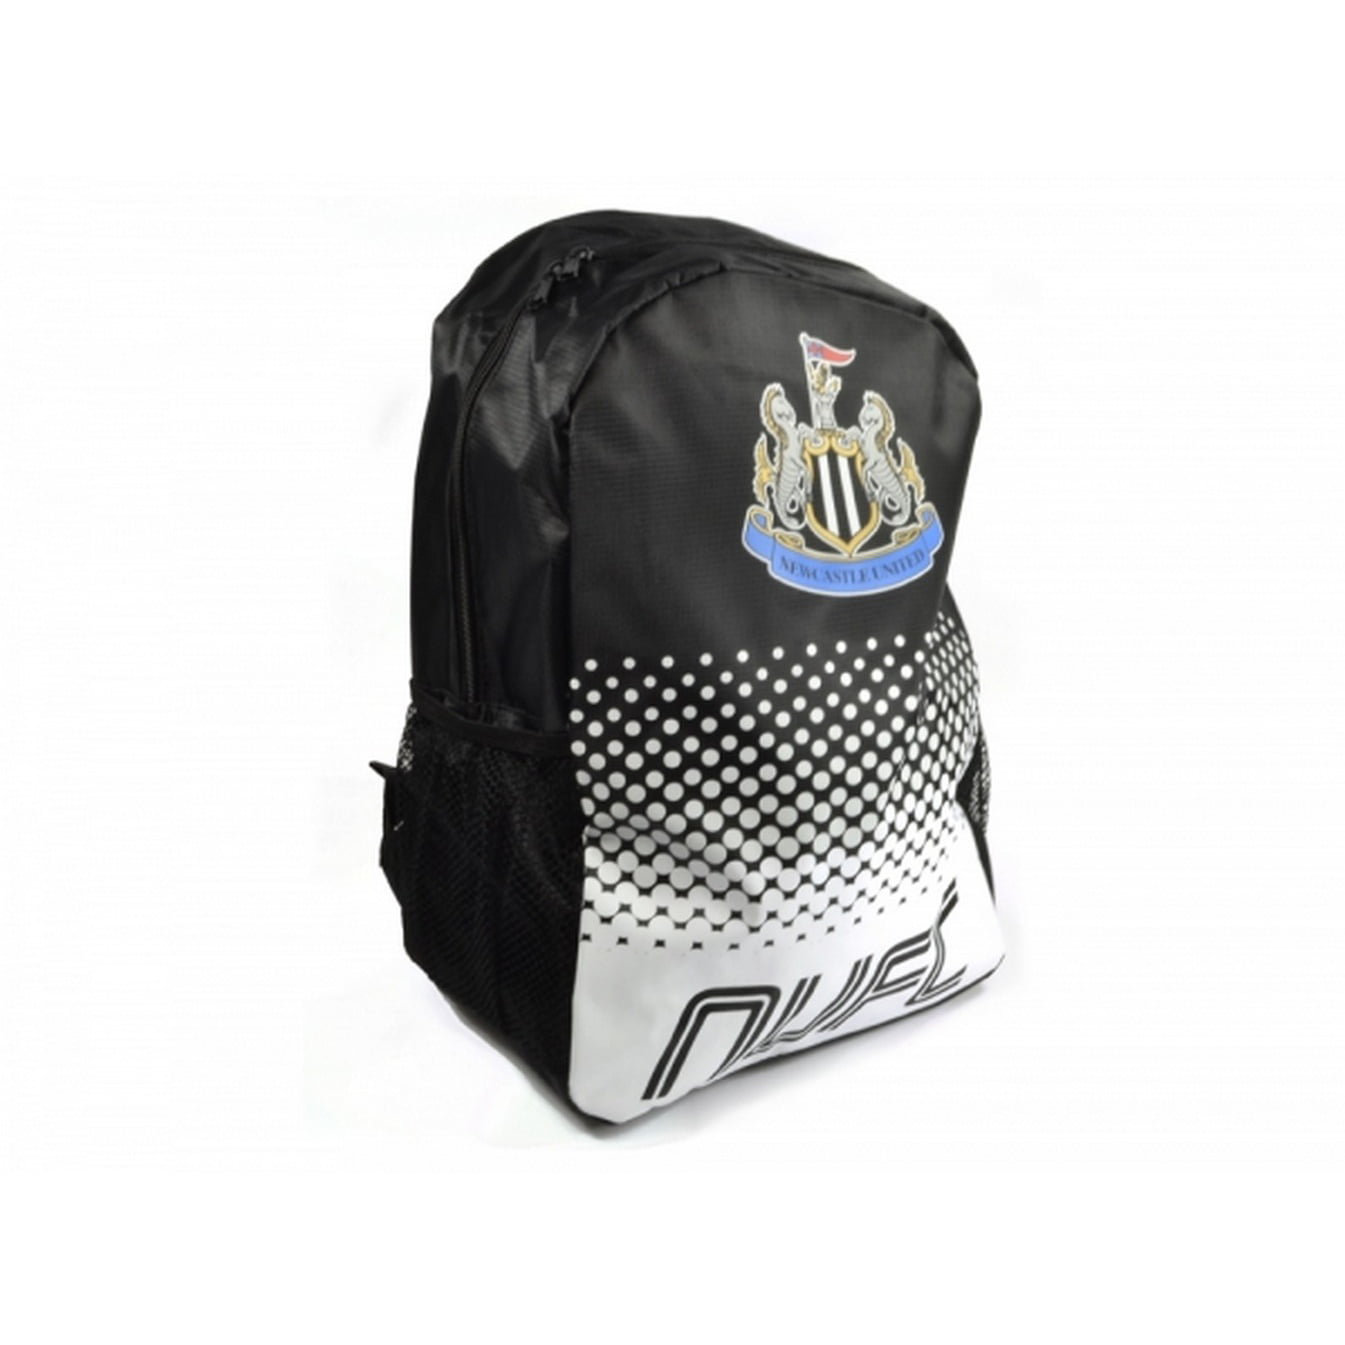 Newcastle United FC Official Fade Gym Bag 